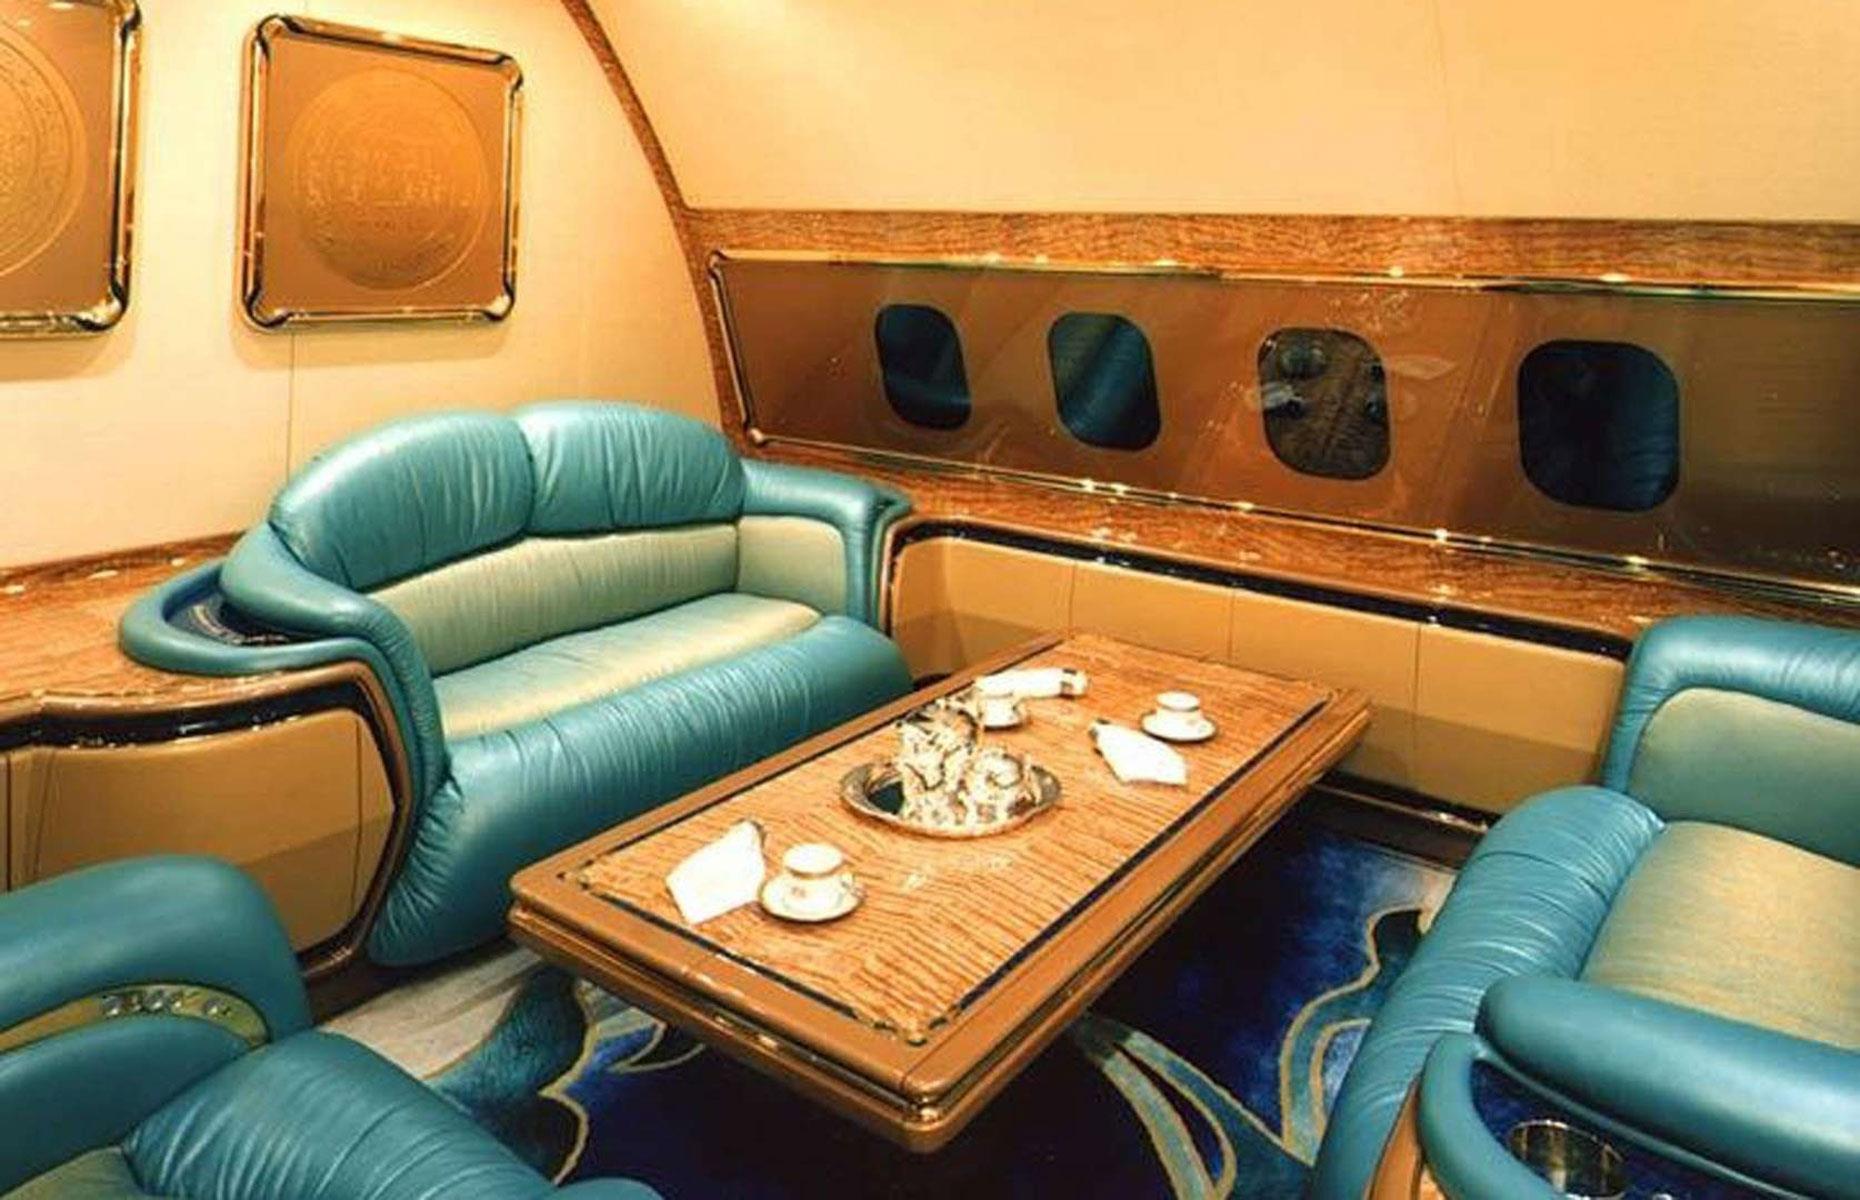 <p>Equally ostentatious is the Sultan of Brunei's Boeing 747-430. The autocratic ruler purchased the jumbo jet for $100 million (£76.7m) and dropped an additional $120 million (£92.1m) customising the interior. Super-extravagant, the plane wows with 24-carat gold accents, Lalique crystal fixtures and sumptuous leather sofas.</p>